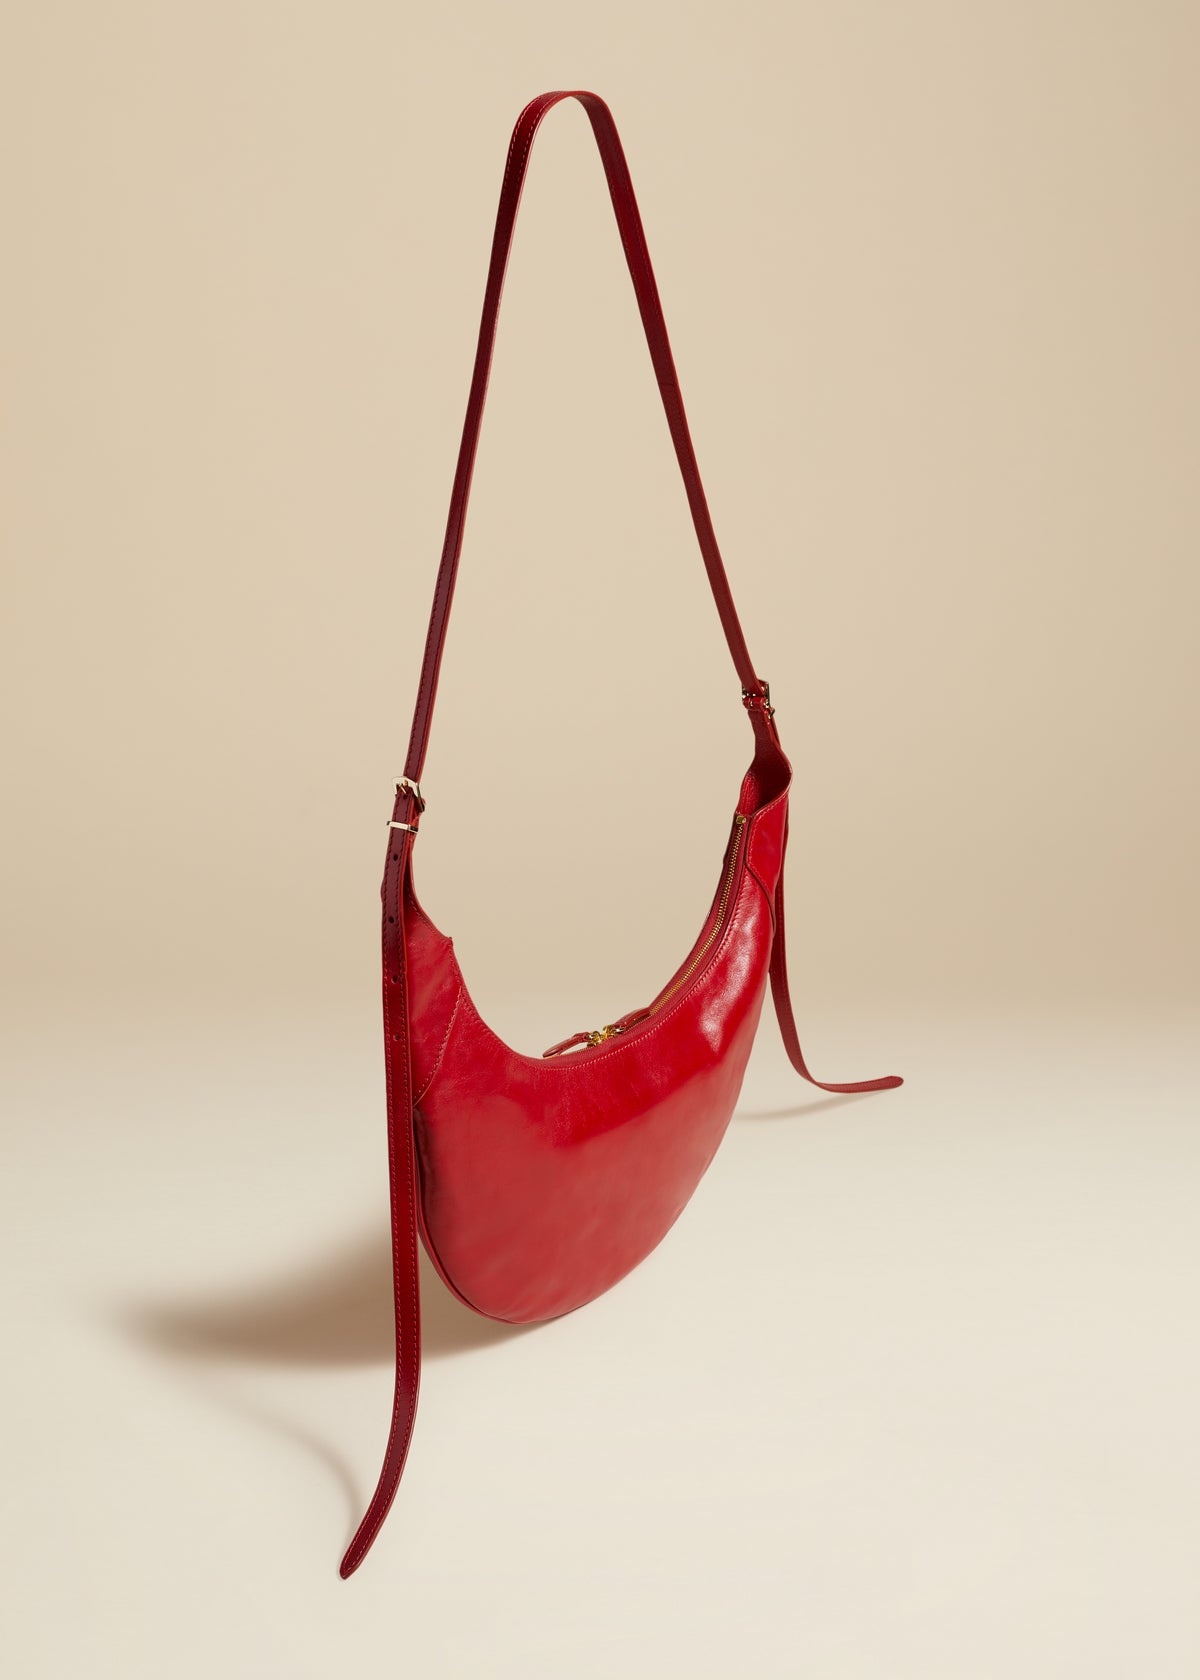 The Alessia Crossbody Bag in Fire Red Leather - 2